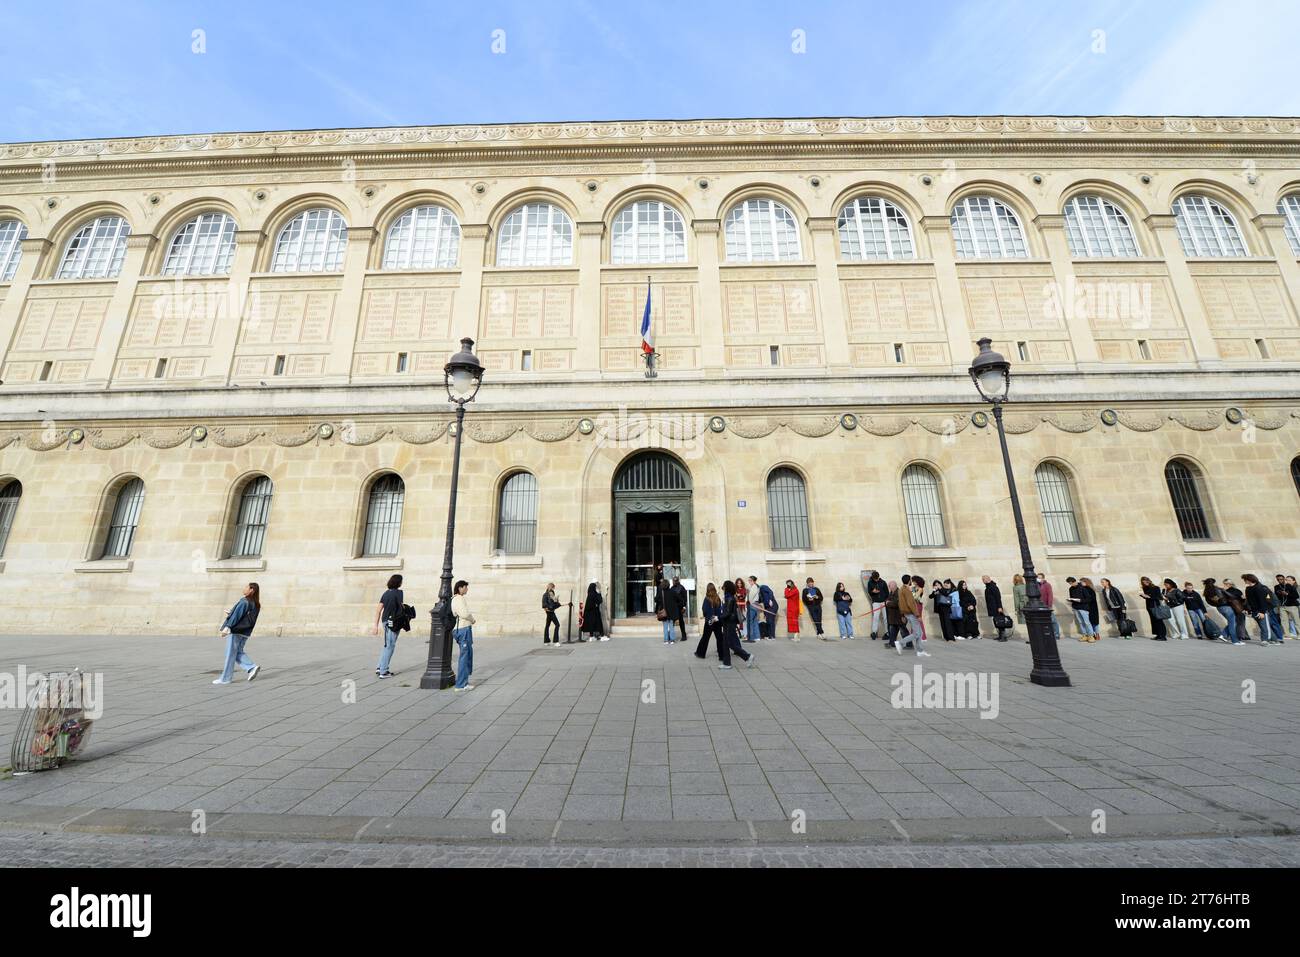 Students waiting in line in order to go into the Bibliothèque Sainte-Geneviève ( University Library ) of the Université Sorbonne Nouvelle in Paris. Stock Photo